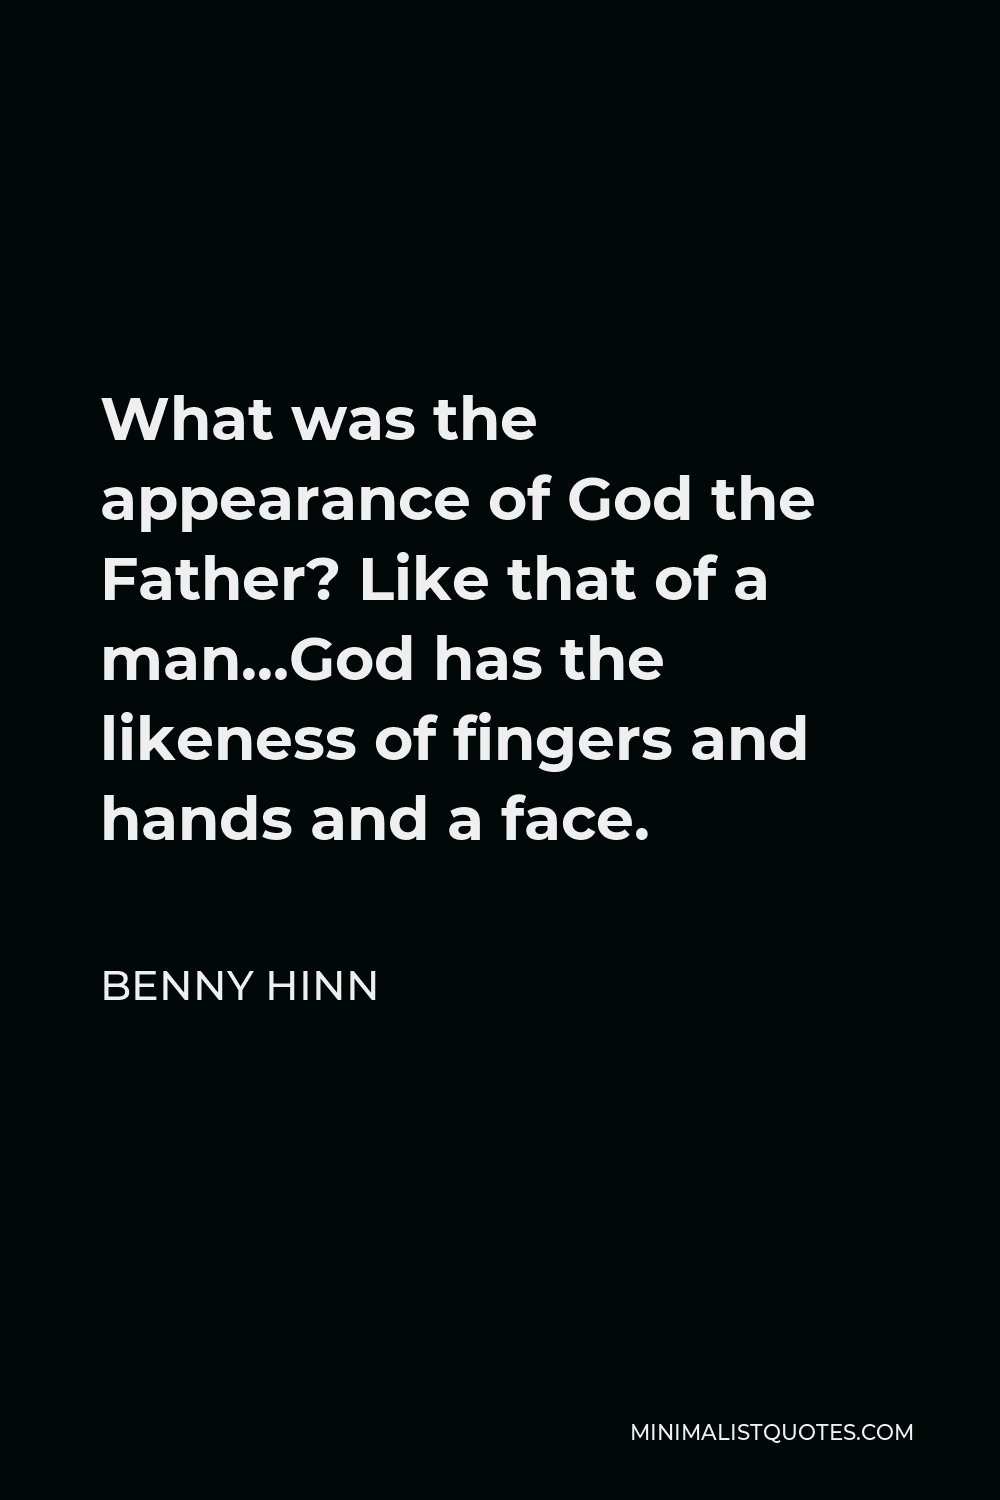 Benny Hinn Quote - What was the appearance of God the Father? Like that of a man…God has the likeness of fingers and hands and a face.